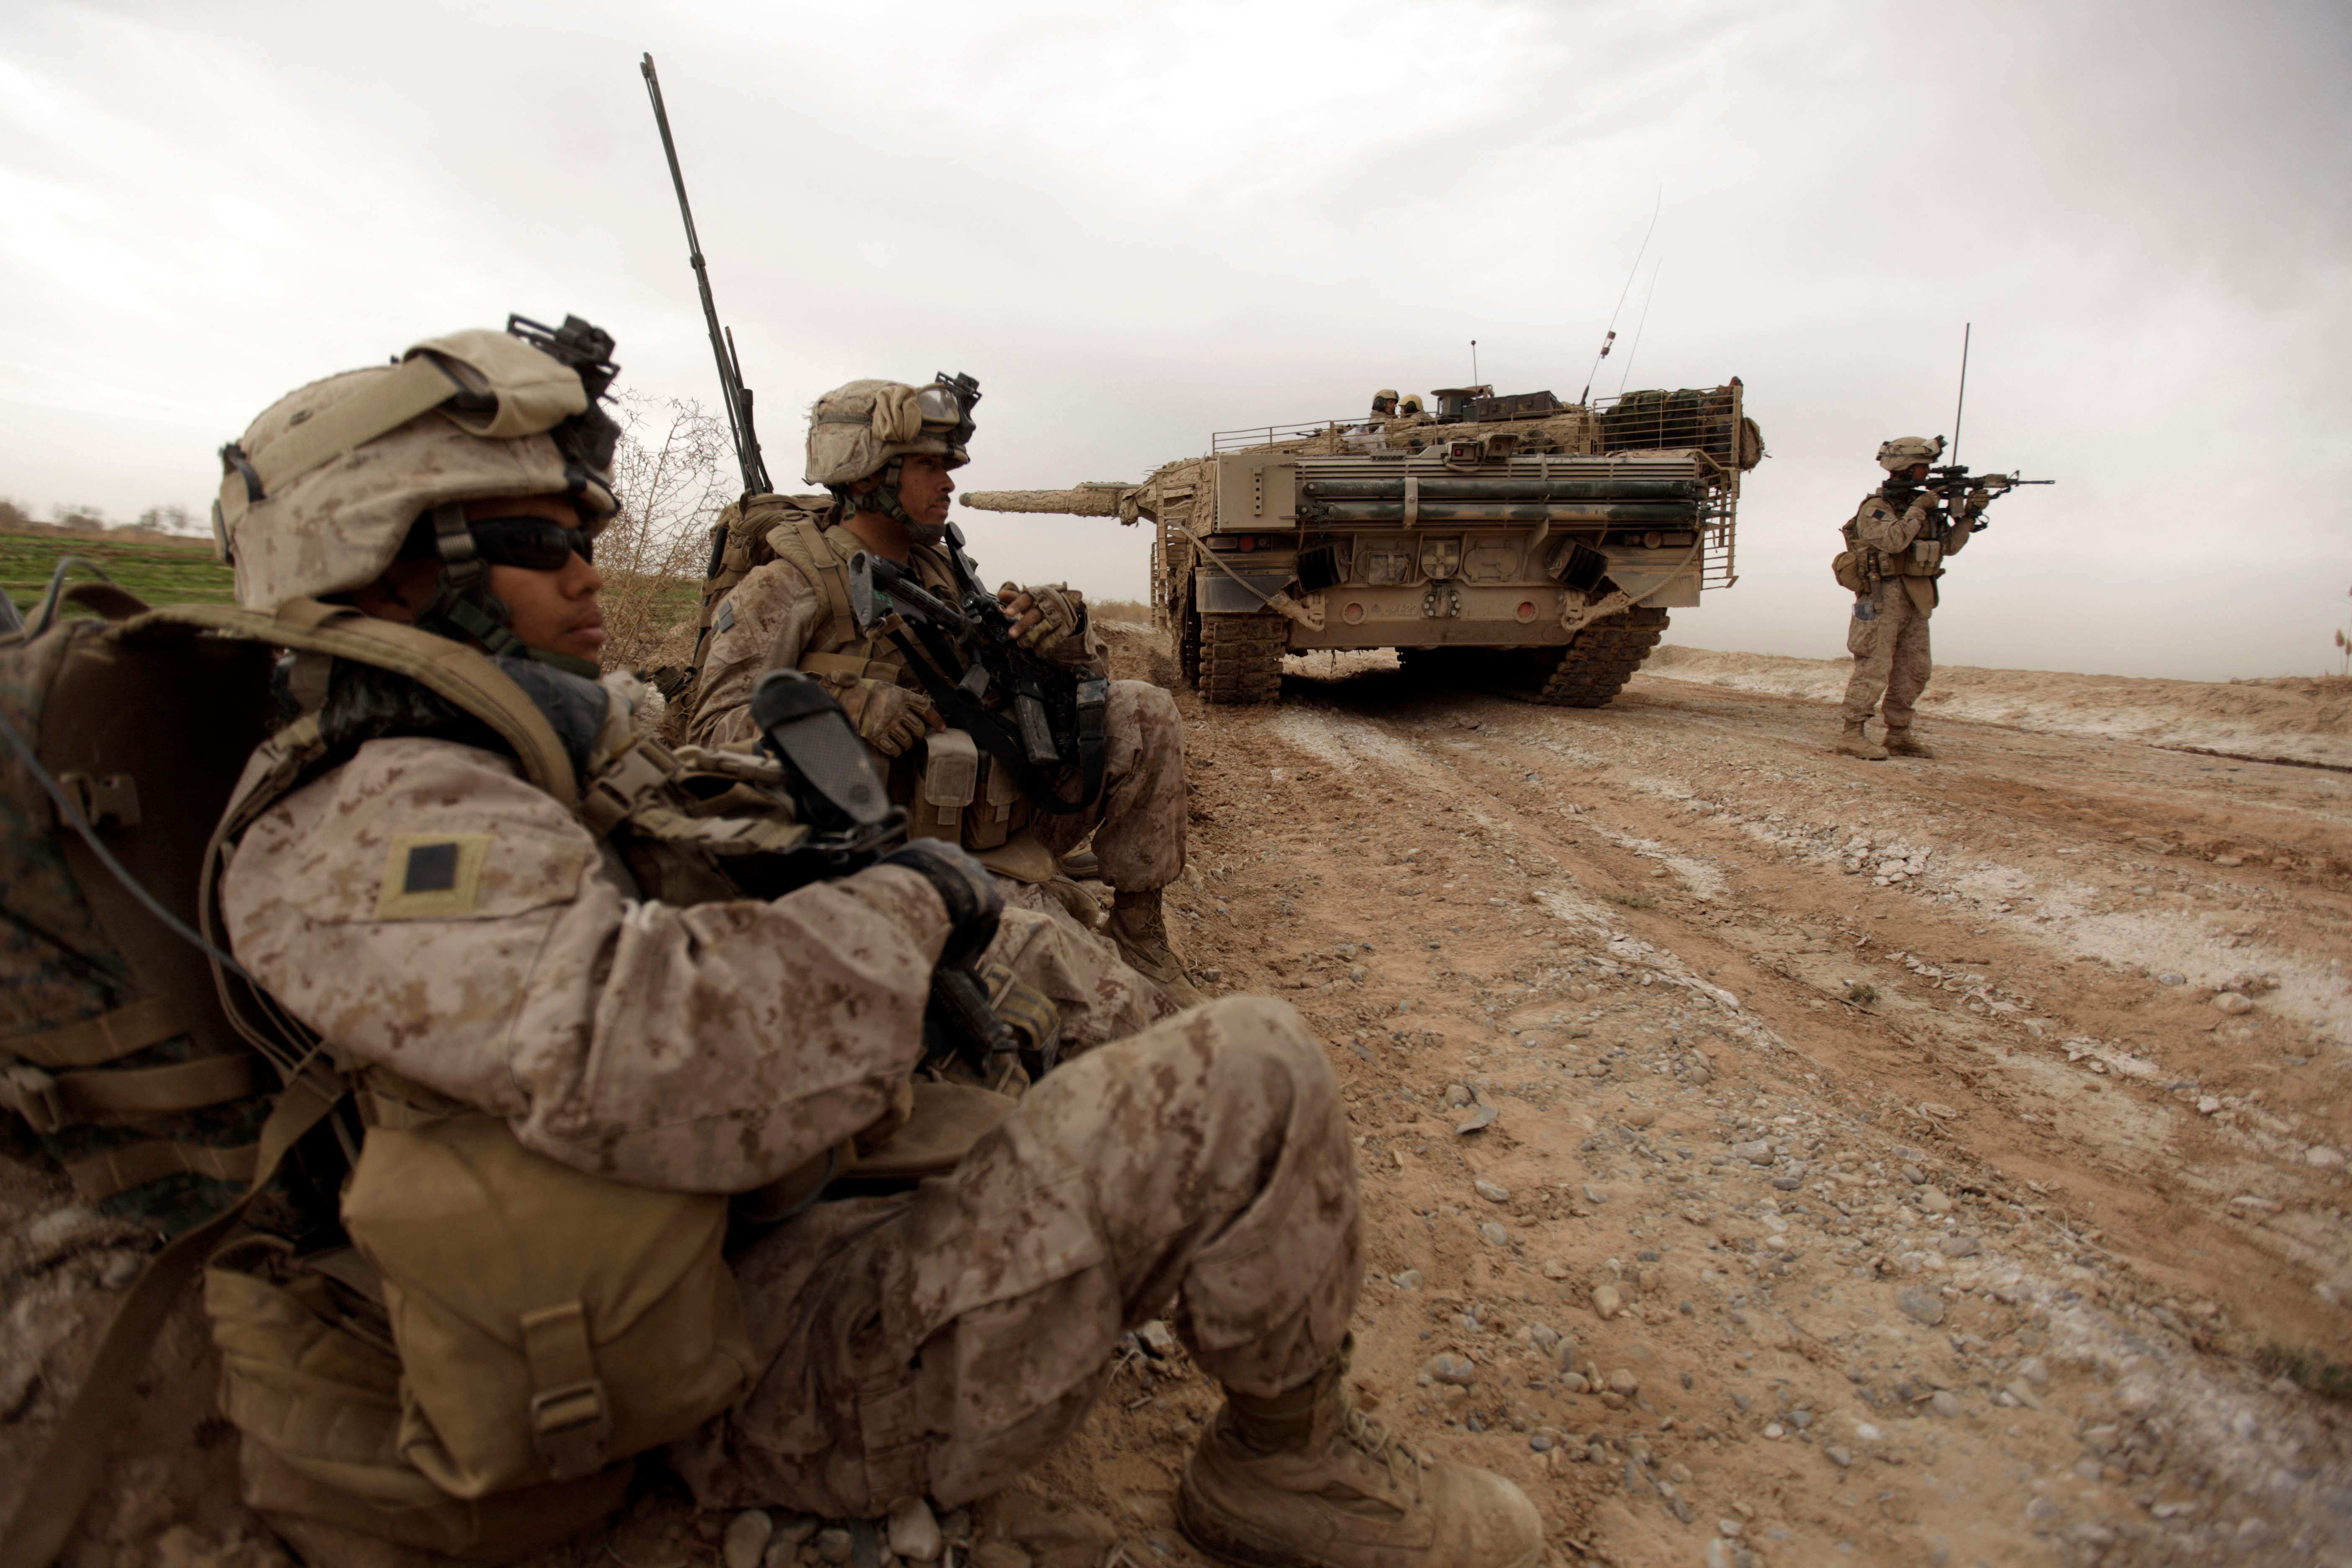 US Marines patrol as they clear improvised explosive devices in Trikh Nawar on the outskirts of Marjah, Afghanistan, on February 21, 2010. Photo: AFP